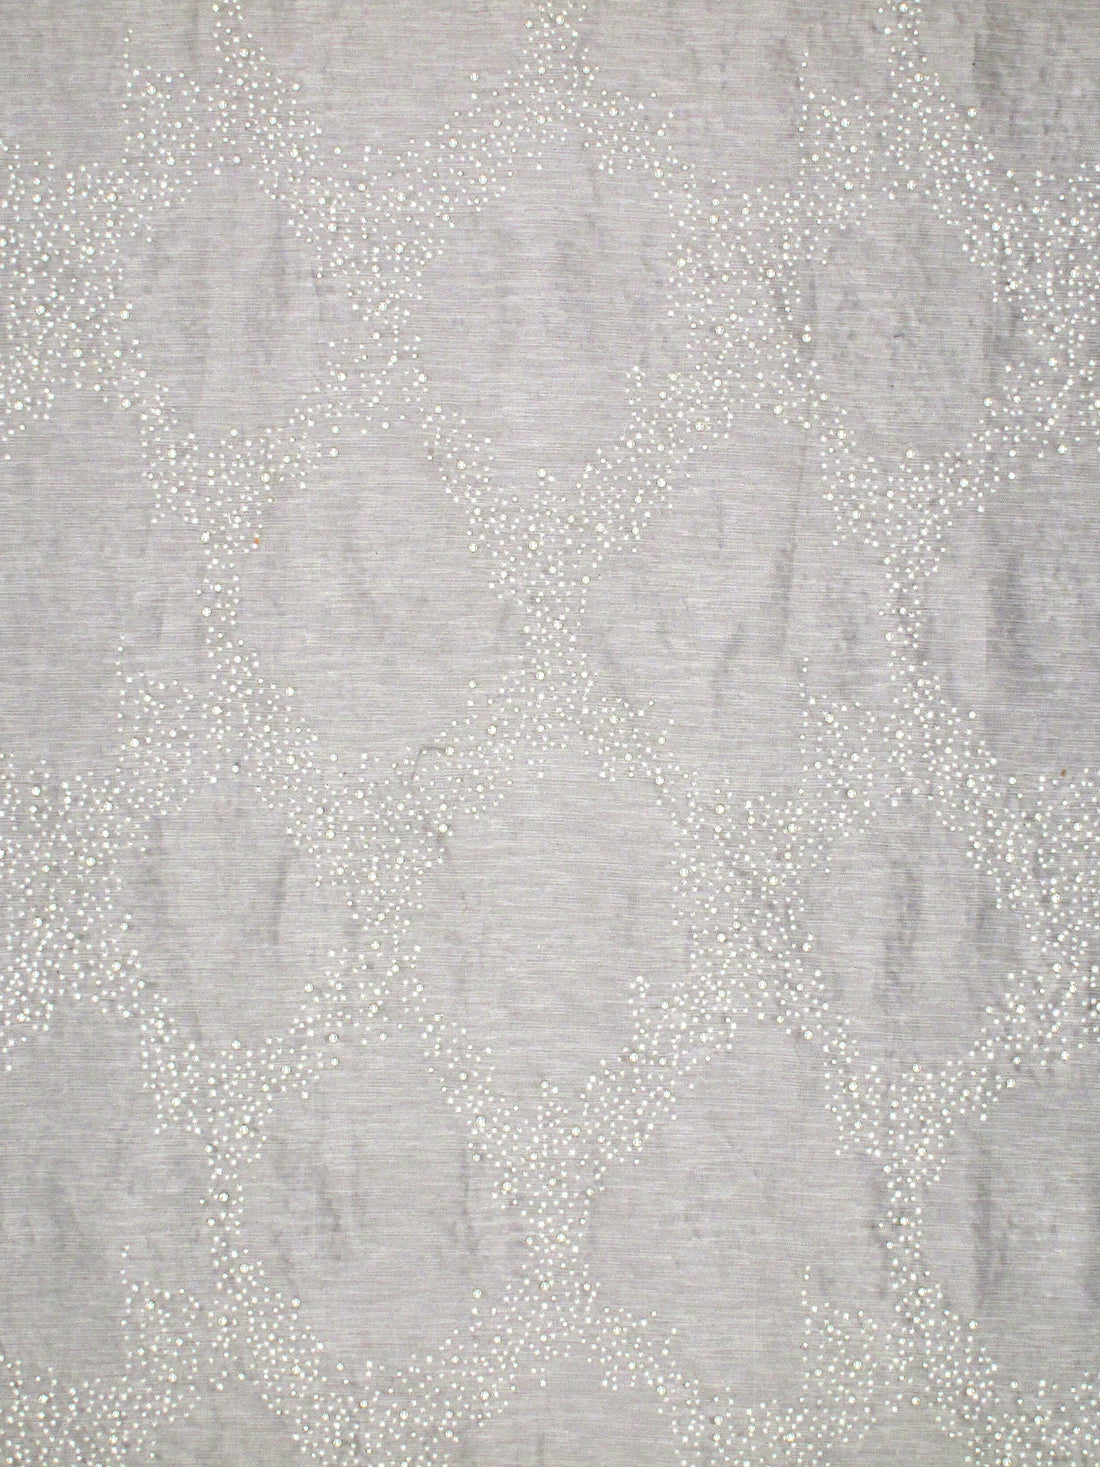 Pearlescence fabric in taupe color - pattern number M1 00021017 - by Scalamandre in the Old World Weavers collection